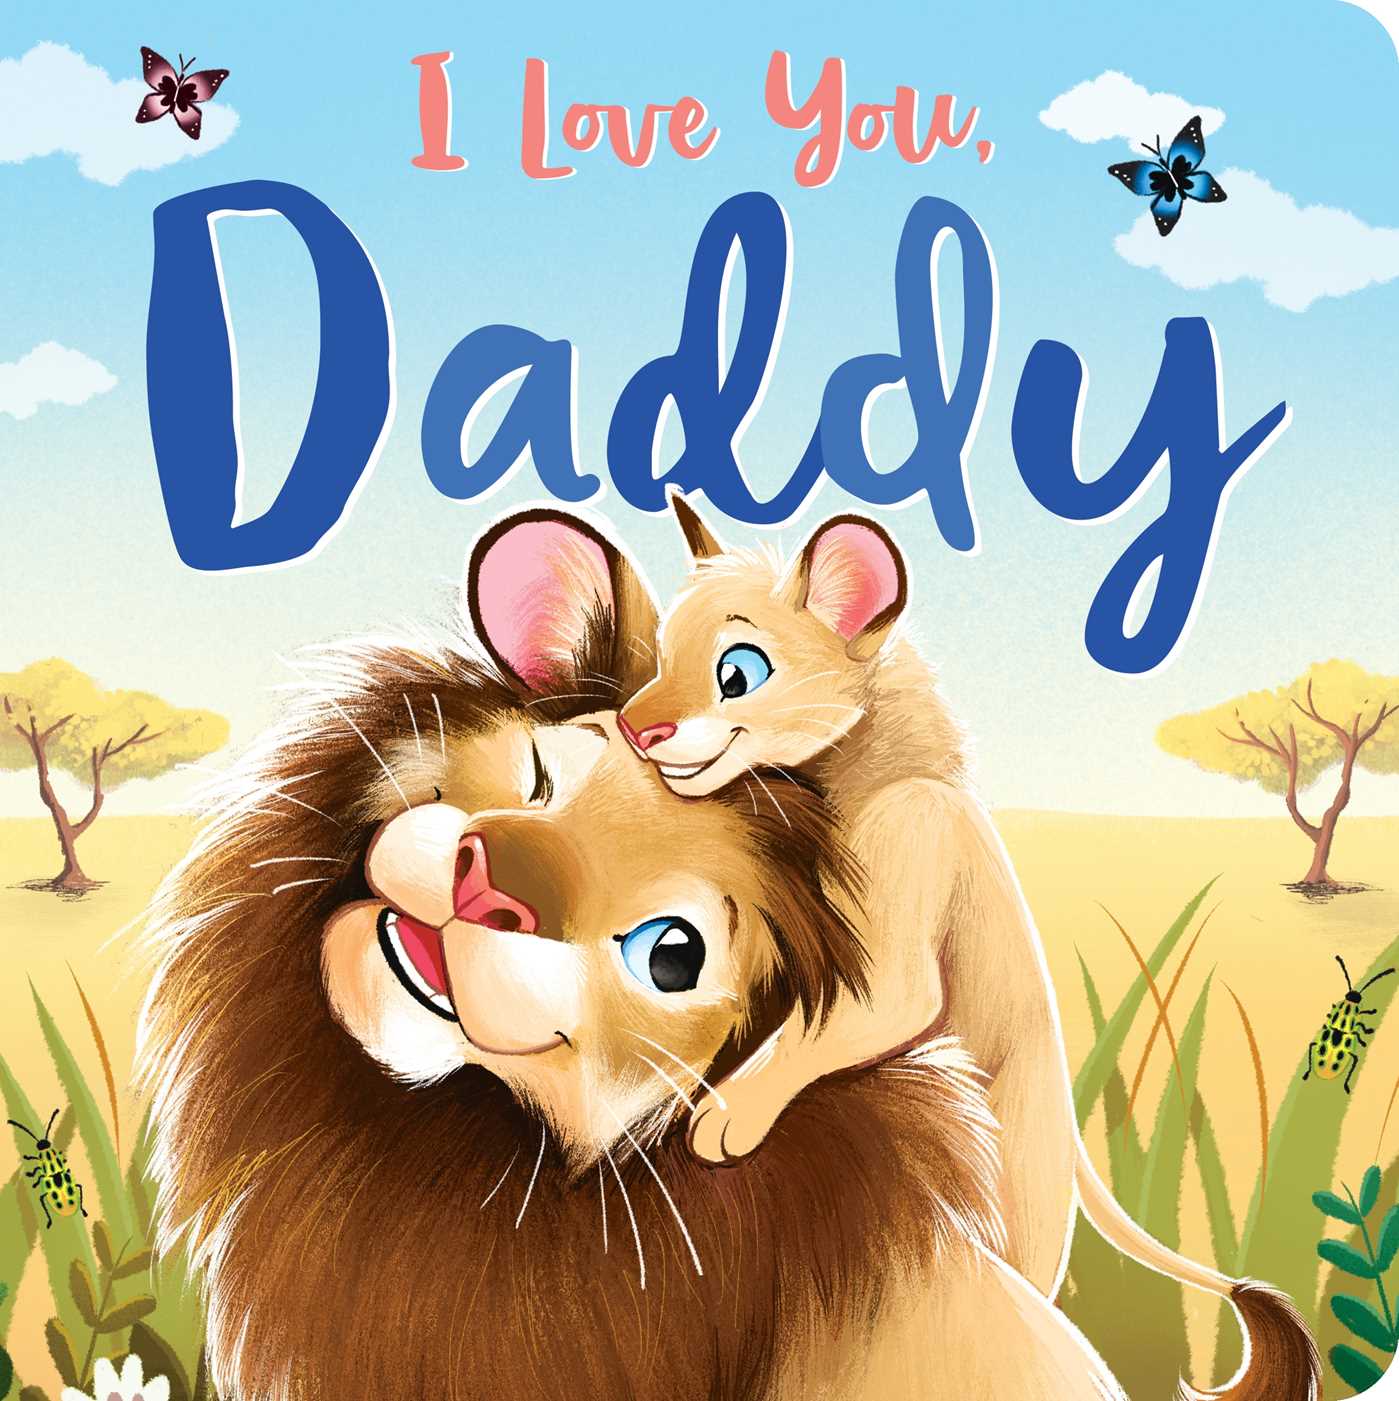 I Love You, Daddy. Book by IglooBooks, Kathryn Inkson. Official Publisher Page. Simon & Schuster